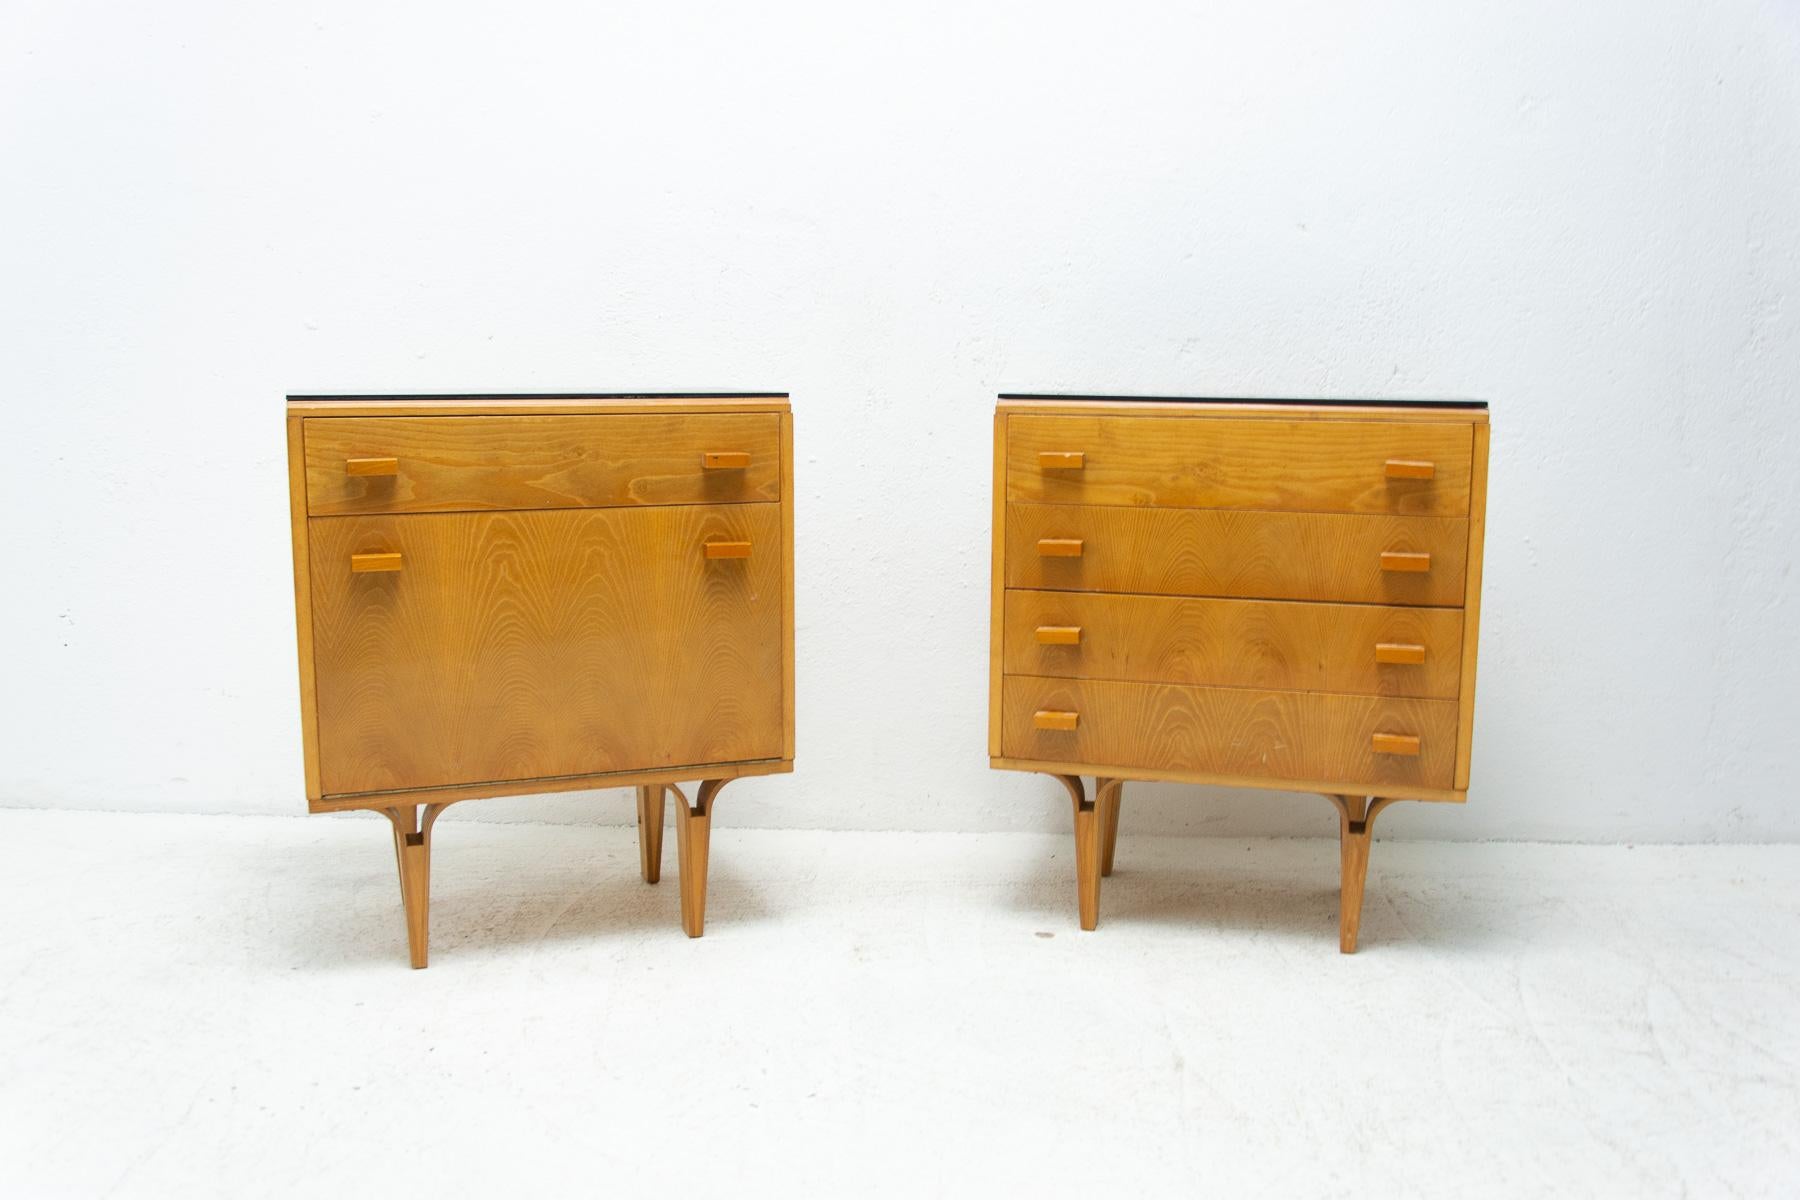 Pair of Mid century night stands, chest of drawers by Frantisek Mezulanik, Nový Domov, 1970´s

These night tables were designed by Czechoslovak architect František Mezulánik for Nový Domov company in the former Czechoslovakia in the